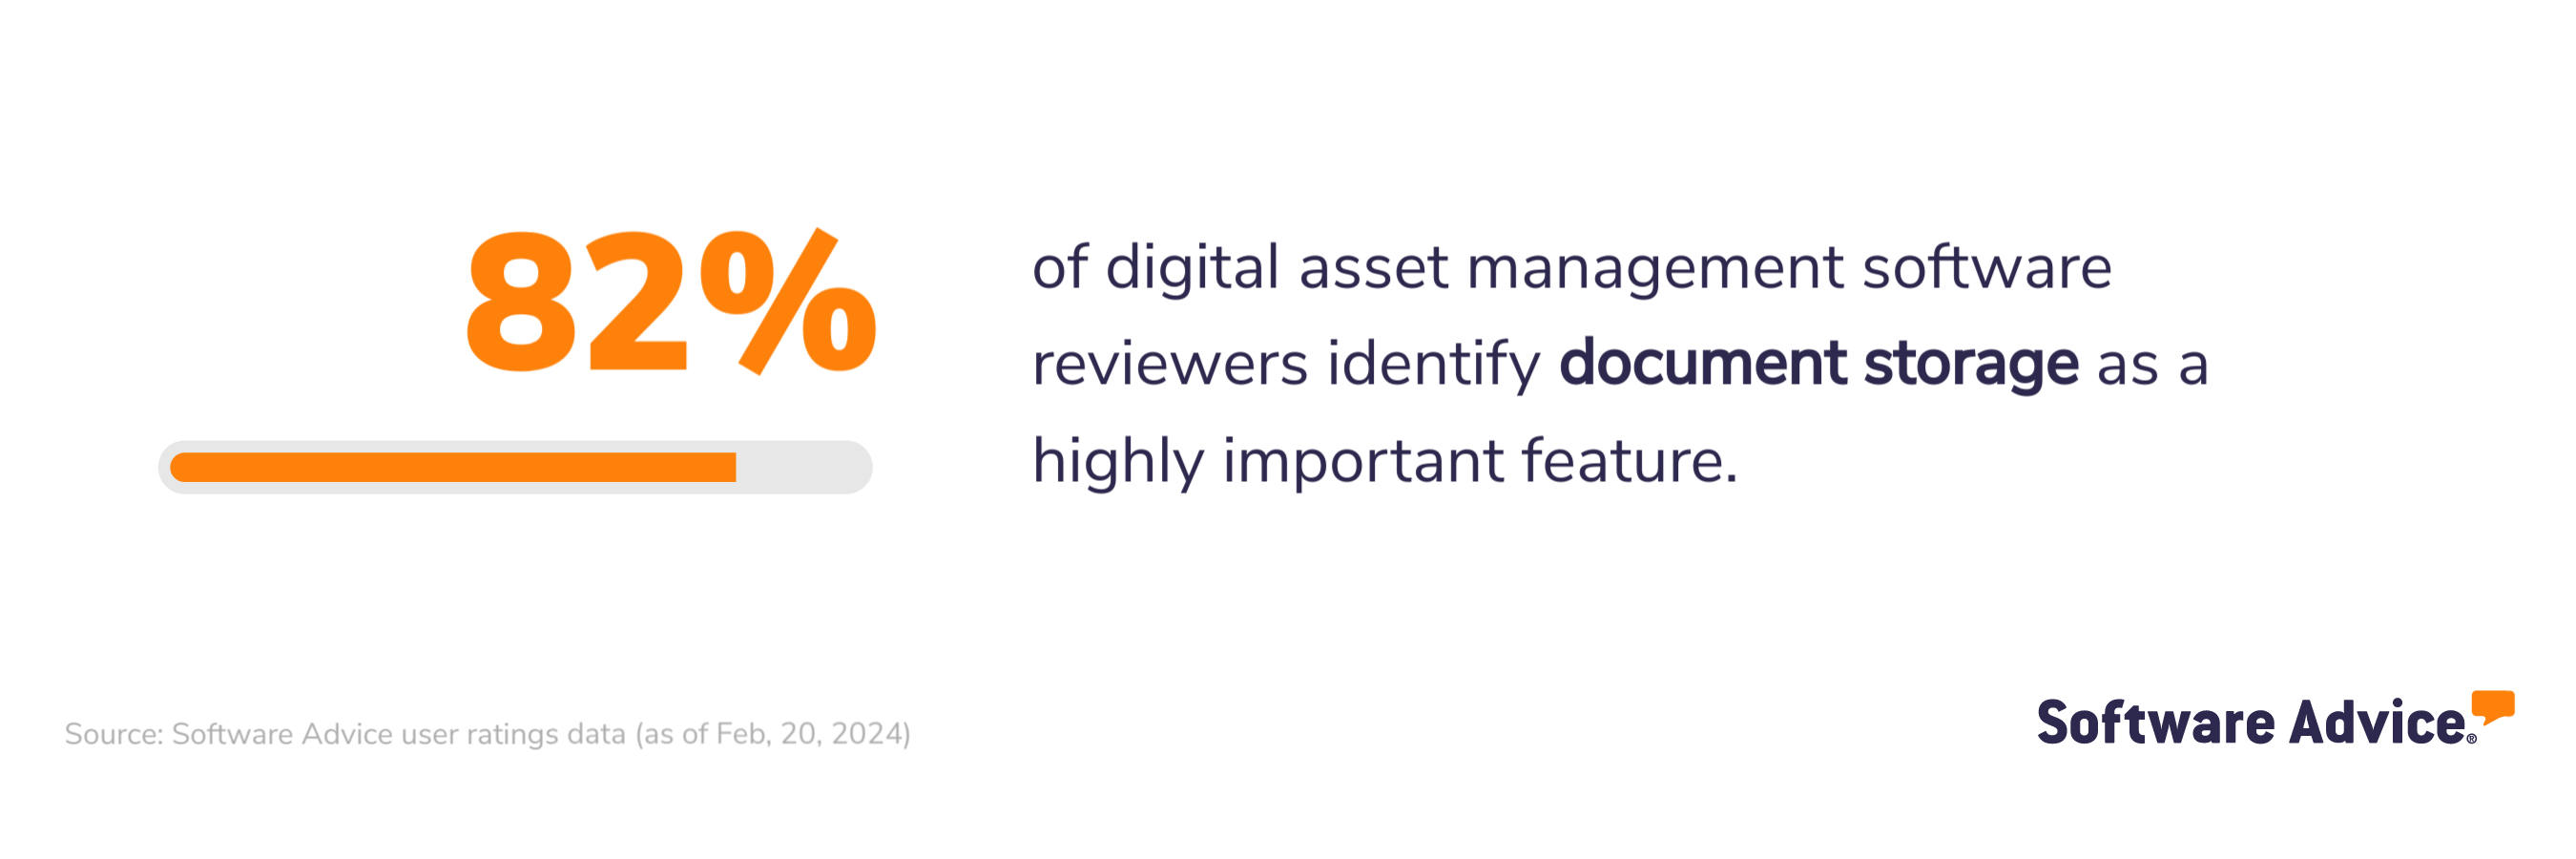 82% of digital asset management software reviewers identify document storage as a highly important feature.